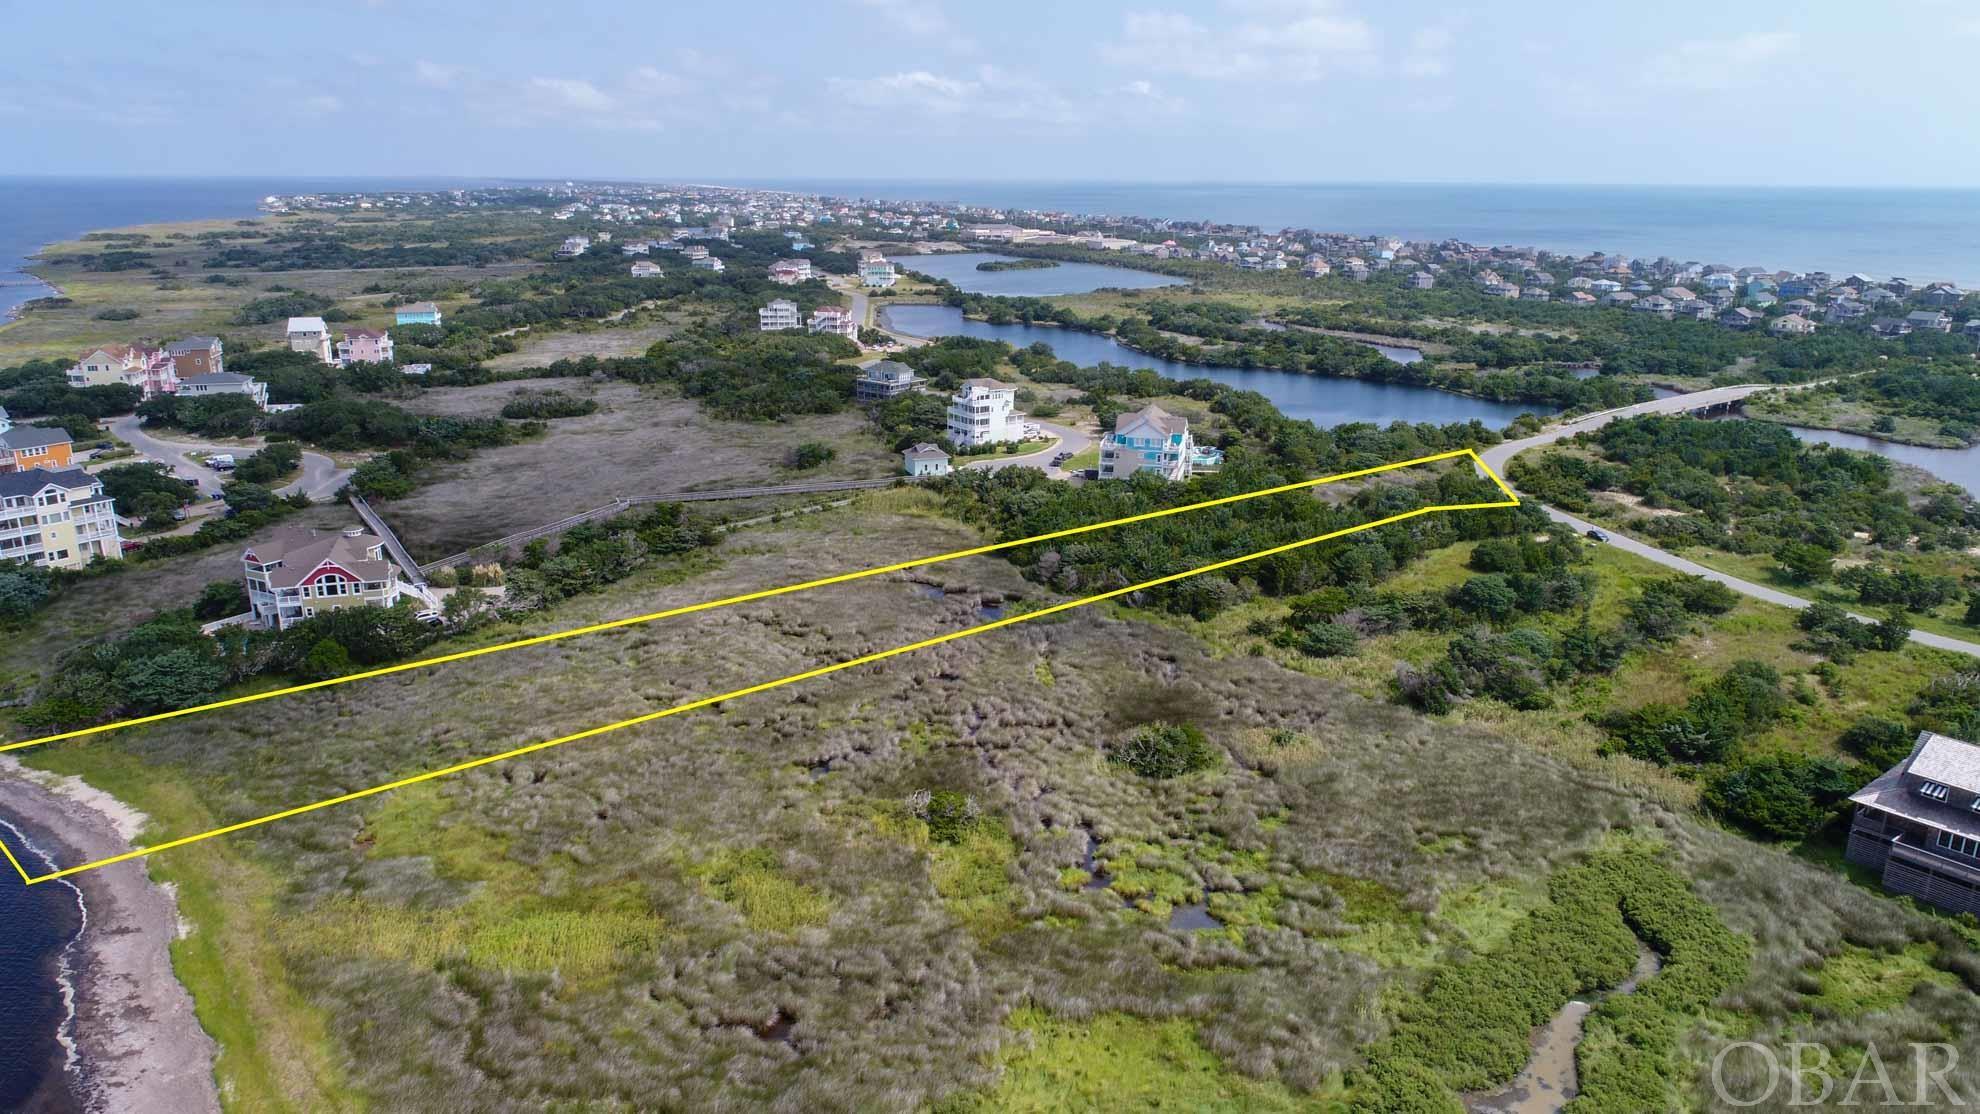 Rare opportunity to secure an amazing soundfront in south Avon across the bridge in Askins creek. The sale of this lot is contingent on the sellers purchase if lor 15 in Hatteras Harbor, Hatteras NC